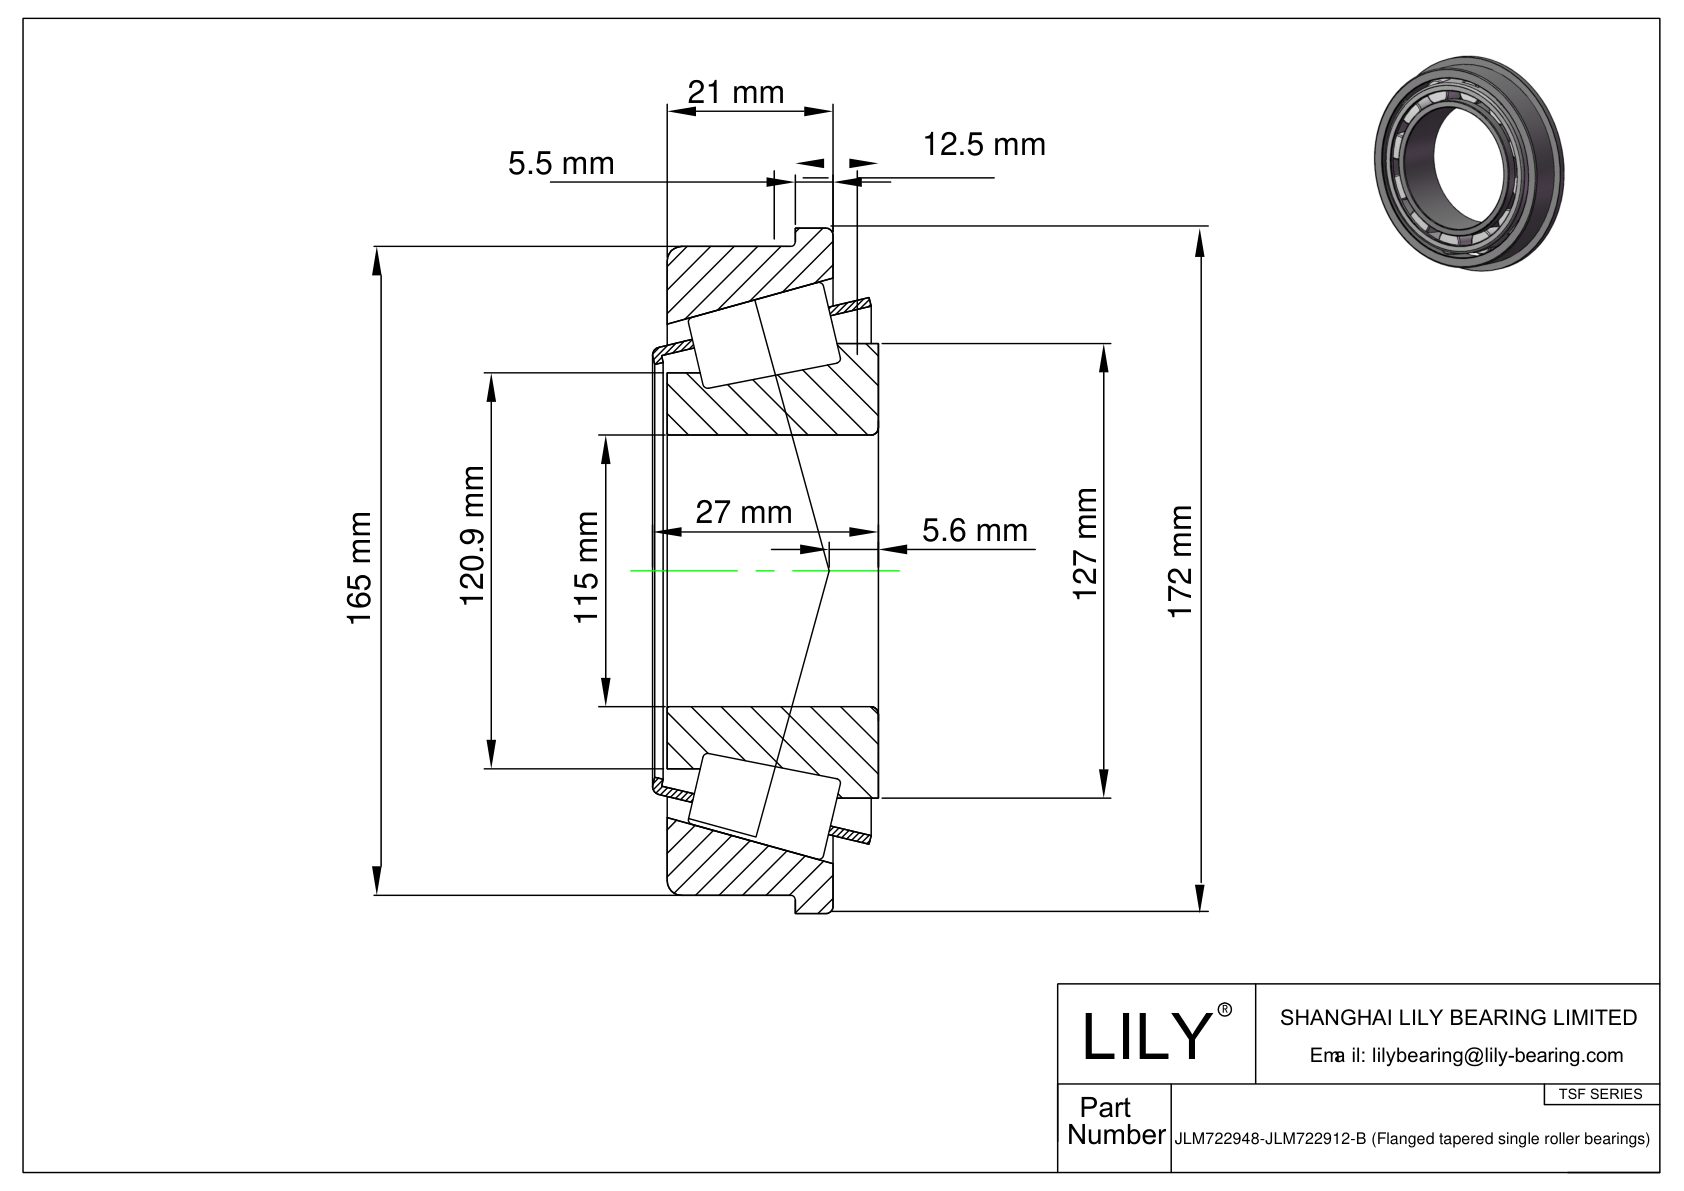 JLM722948-JLM722912-B TSF (Tapered Single Roller Bearings with Flange) (Metric) cad drawing